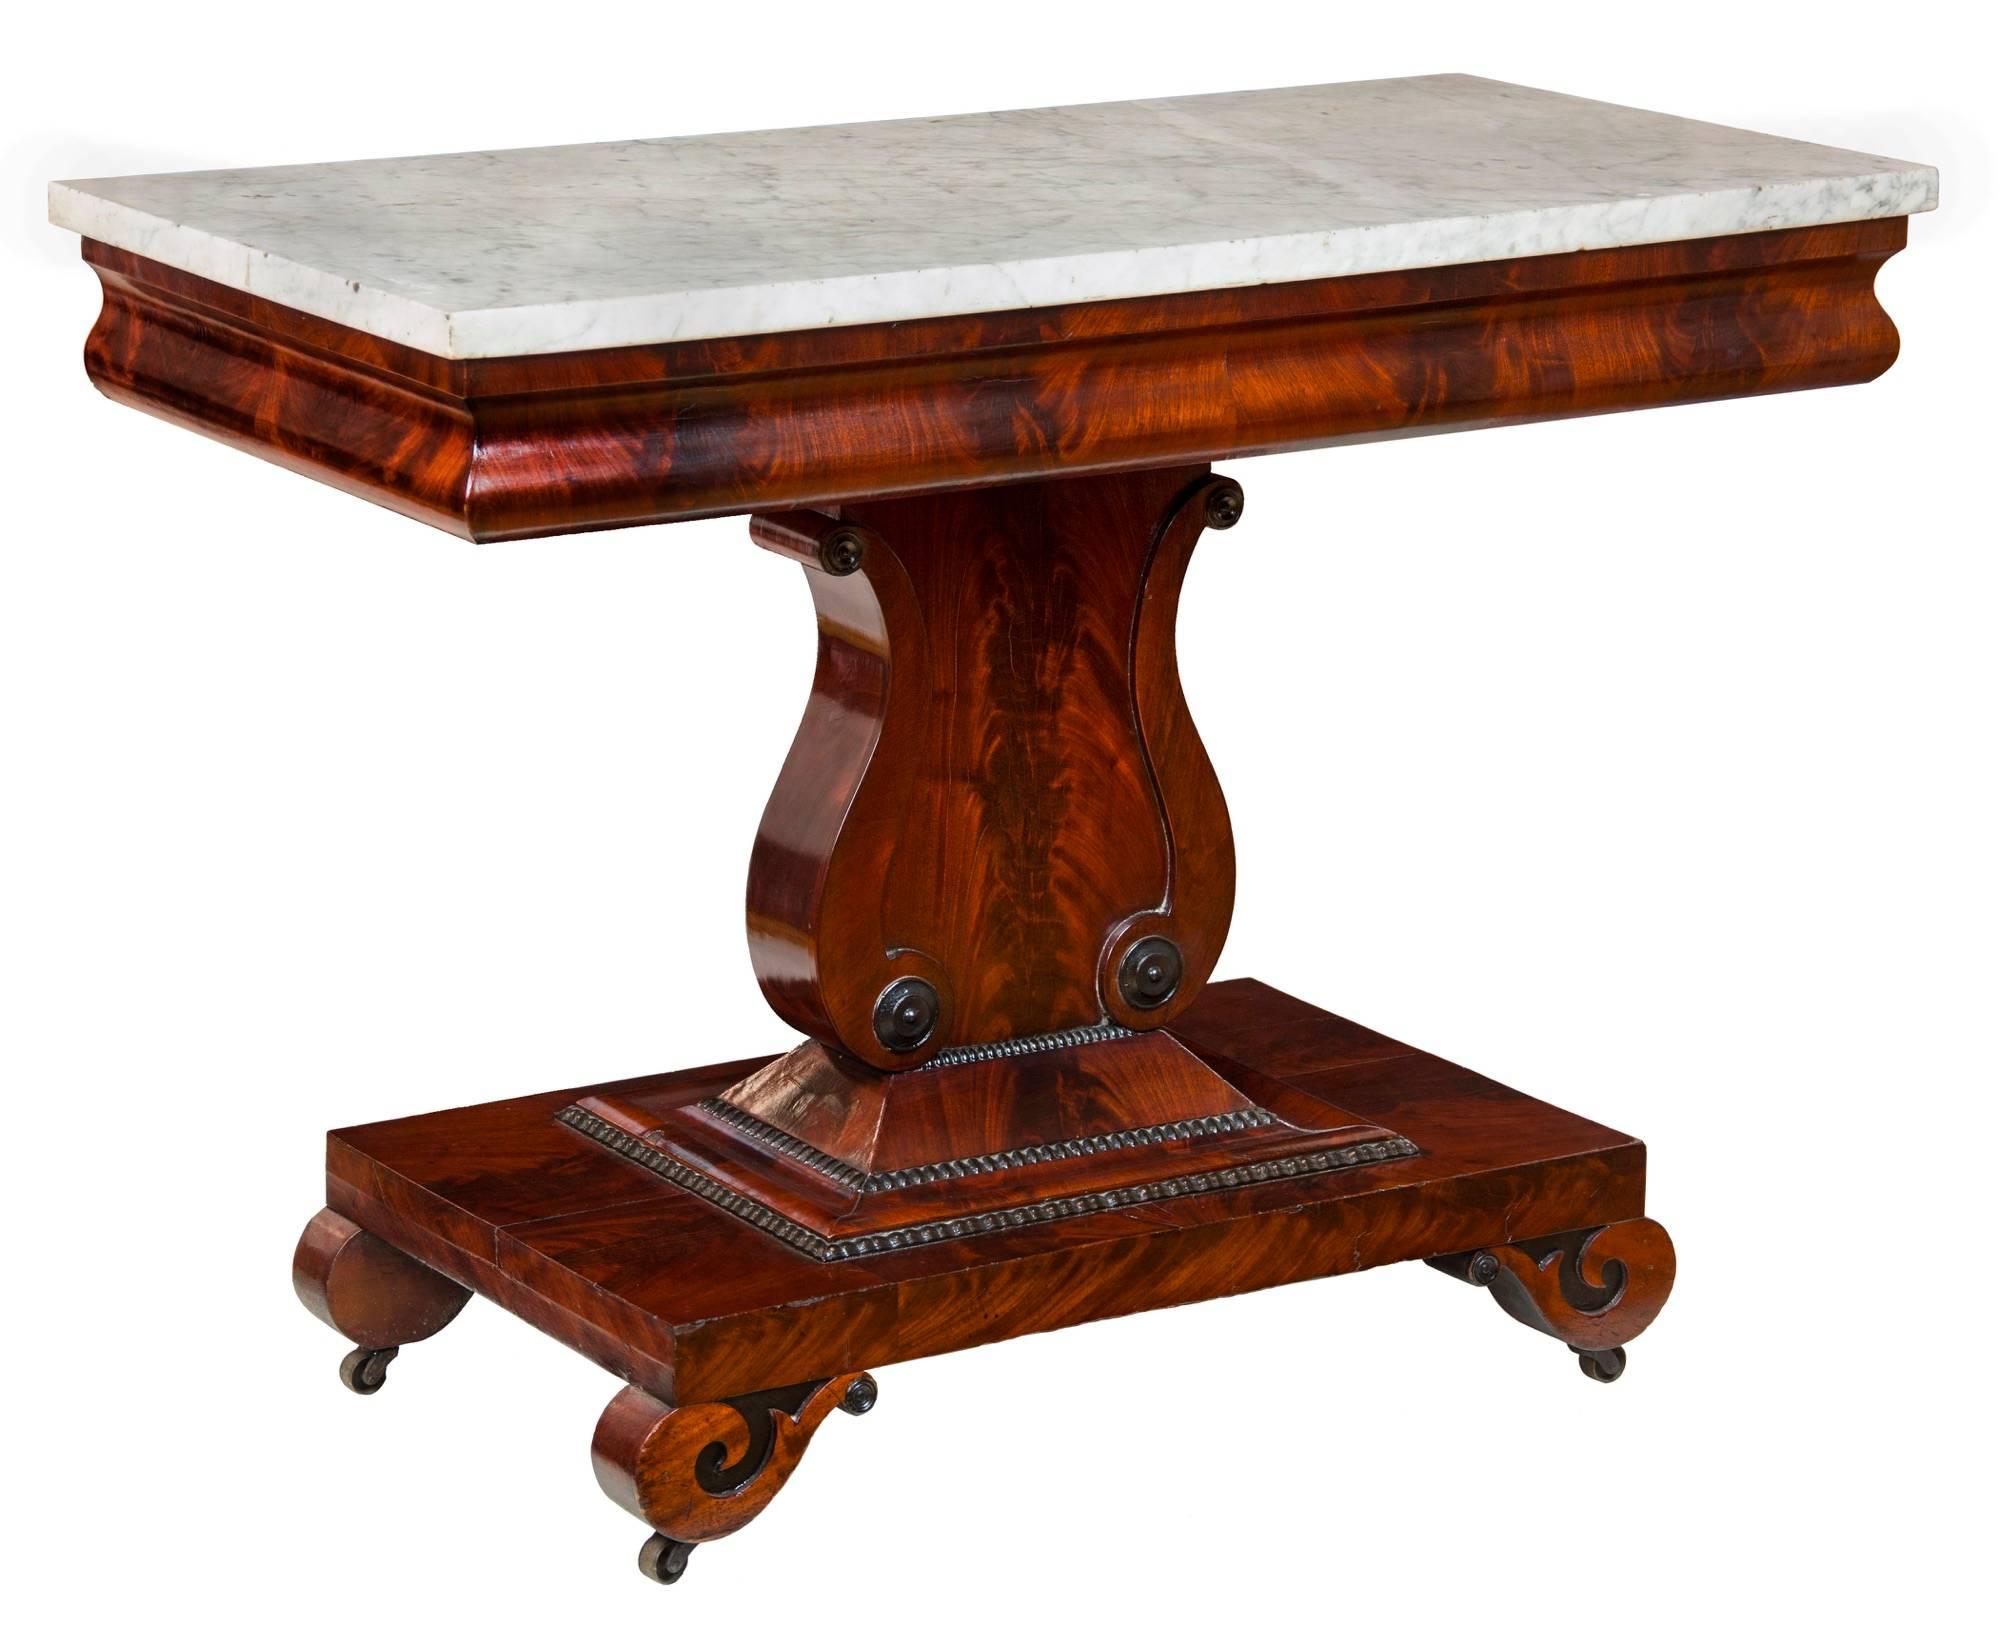 This is a vibrant side table composed of highly figured crotch grain mahogany.   Note its artful use within the center of the lyre base, and also around the apron of the top and beautiful sections on the base, or plinth.    

It is architecturally